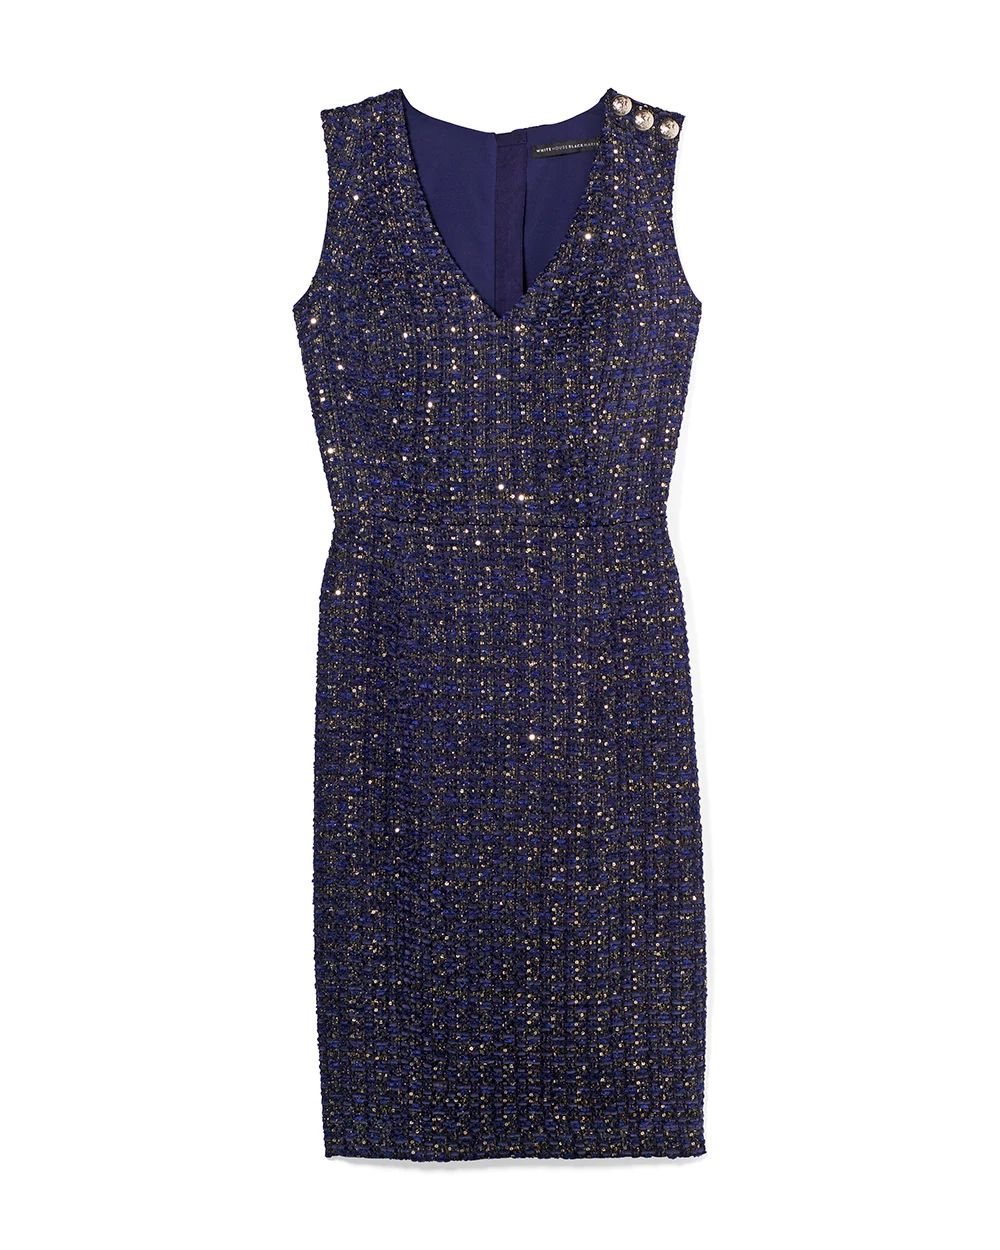 Classic Glitter Tweed Sheath Dress click to view larger image.